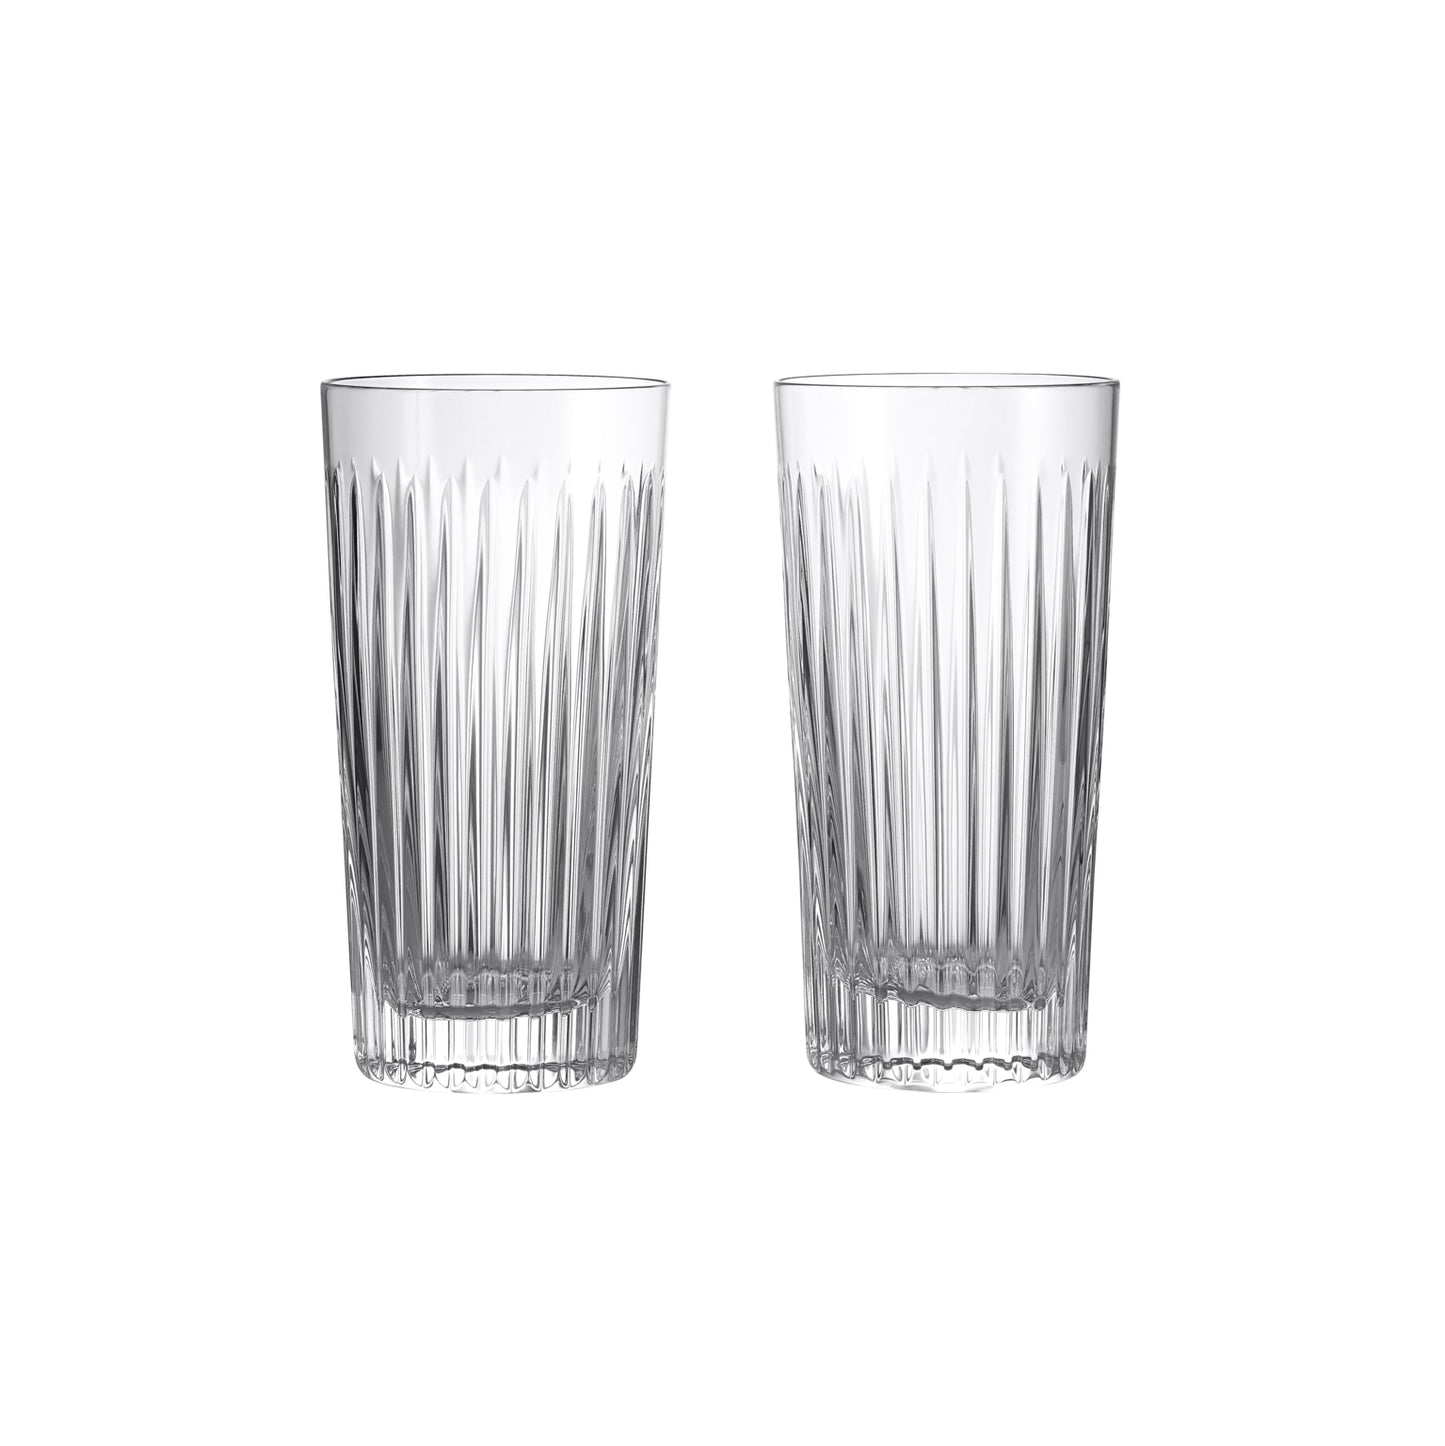 Waterford Crystal Gin Journeys Aras Hiball Set of 2